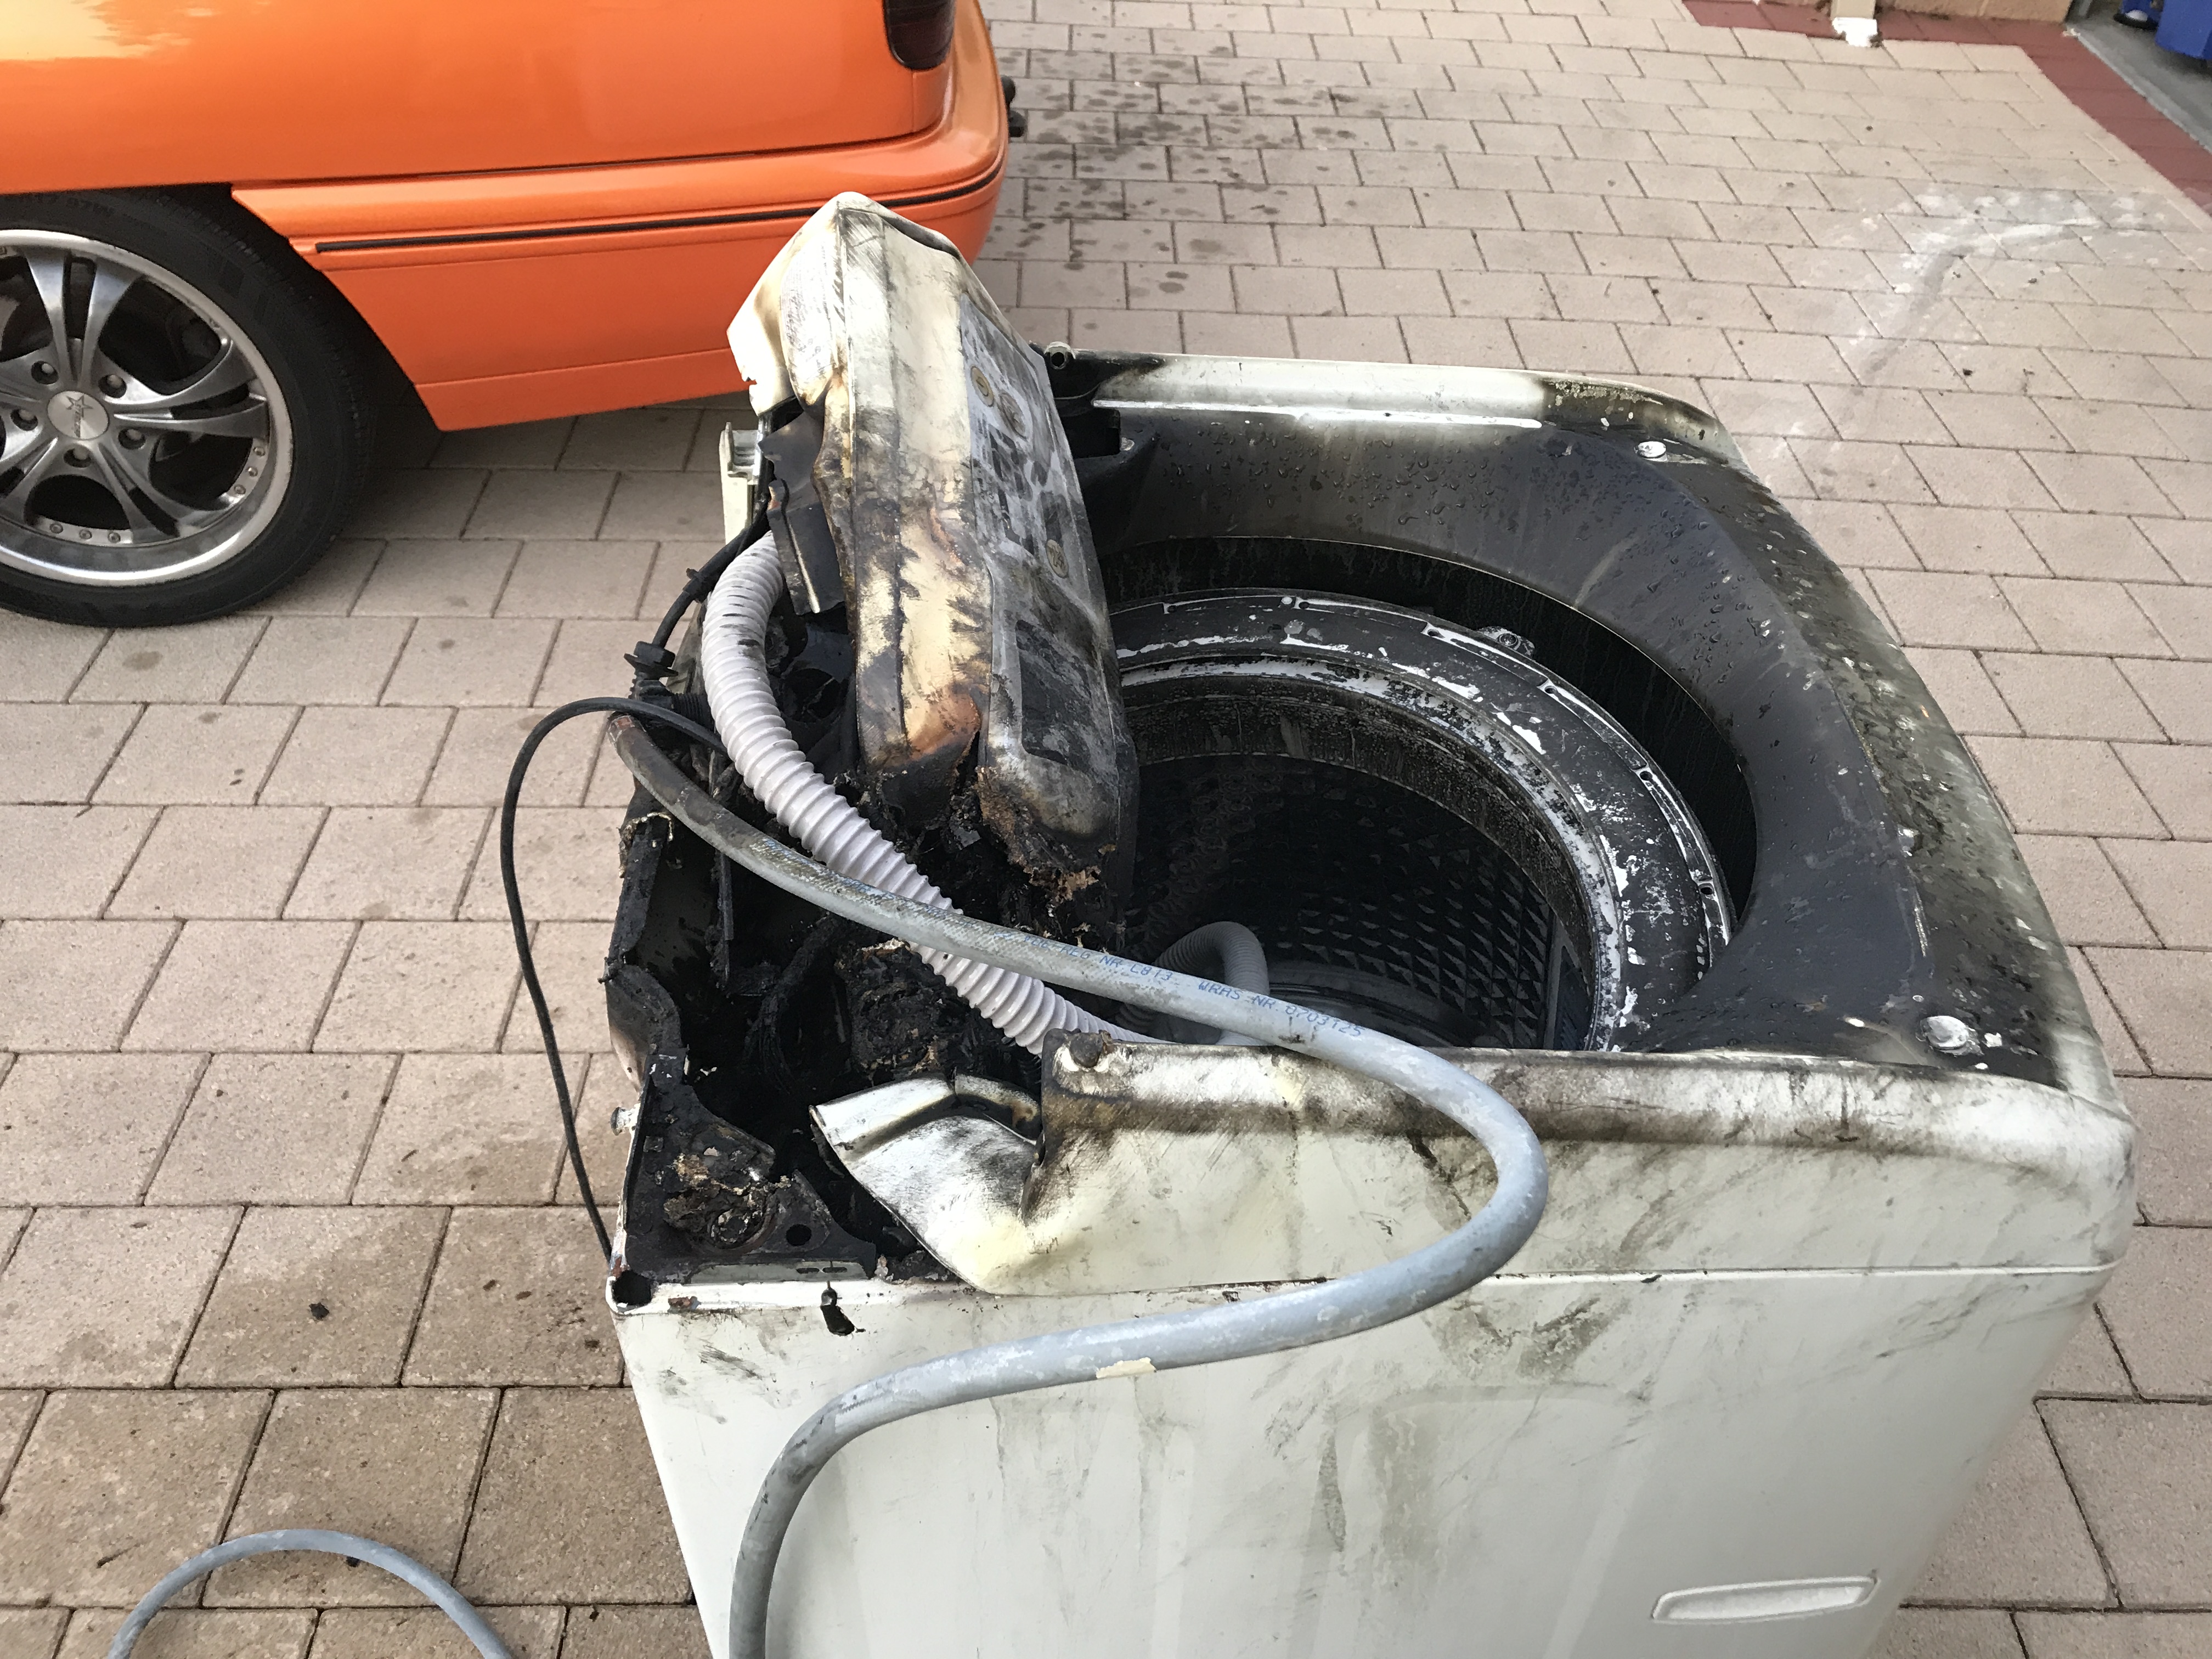 Washing machine fire Armadale - supplied by DFES